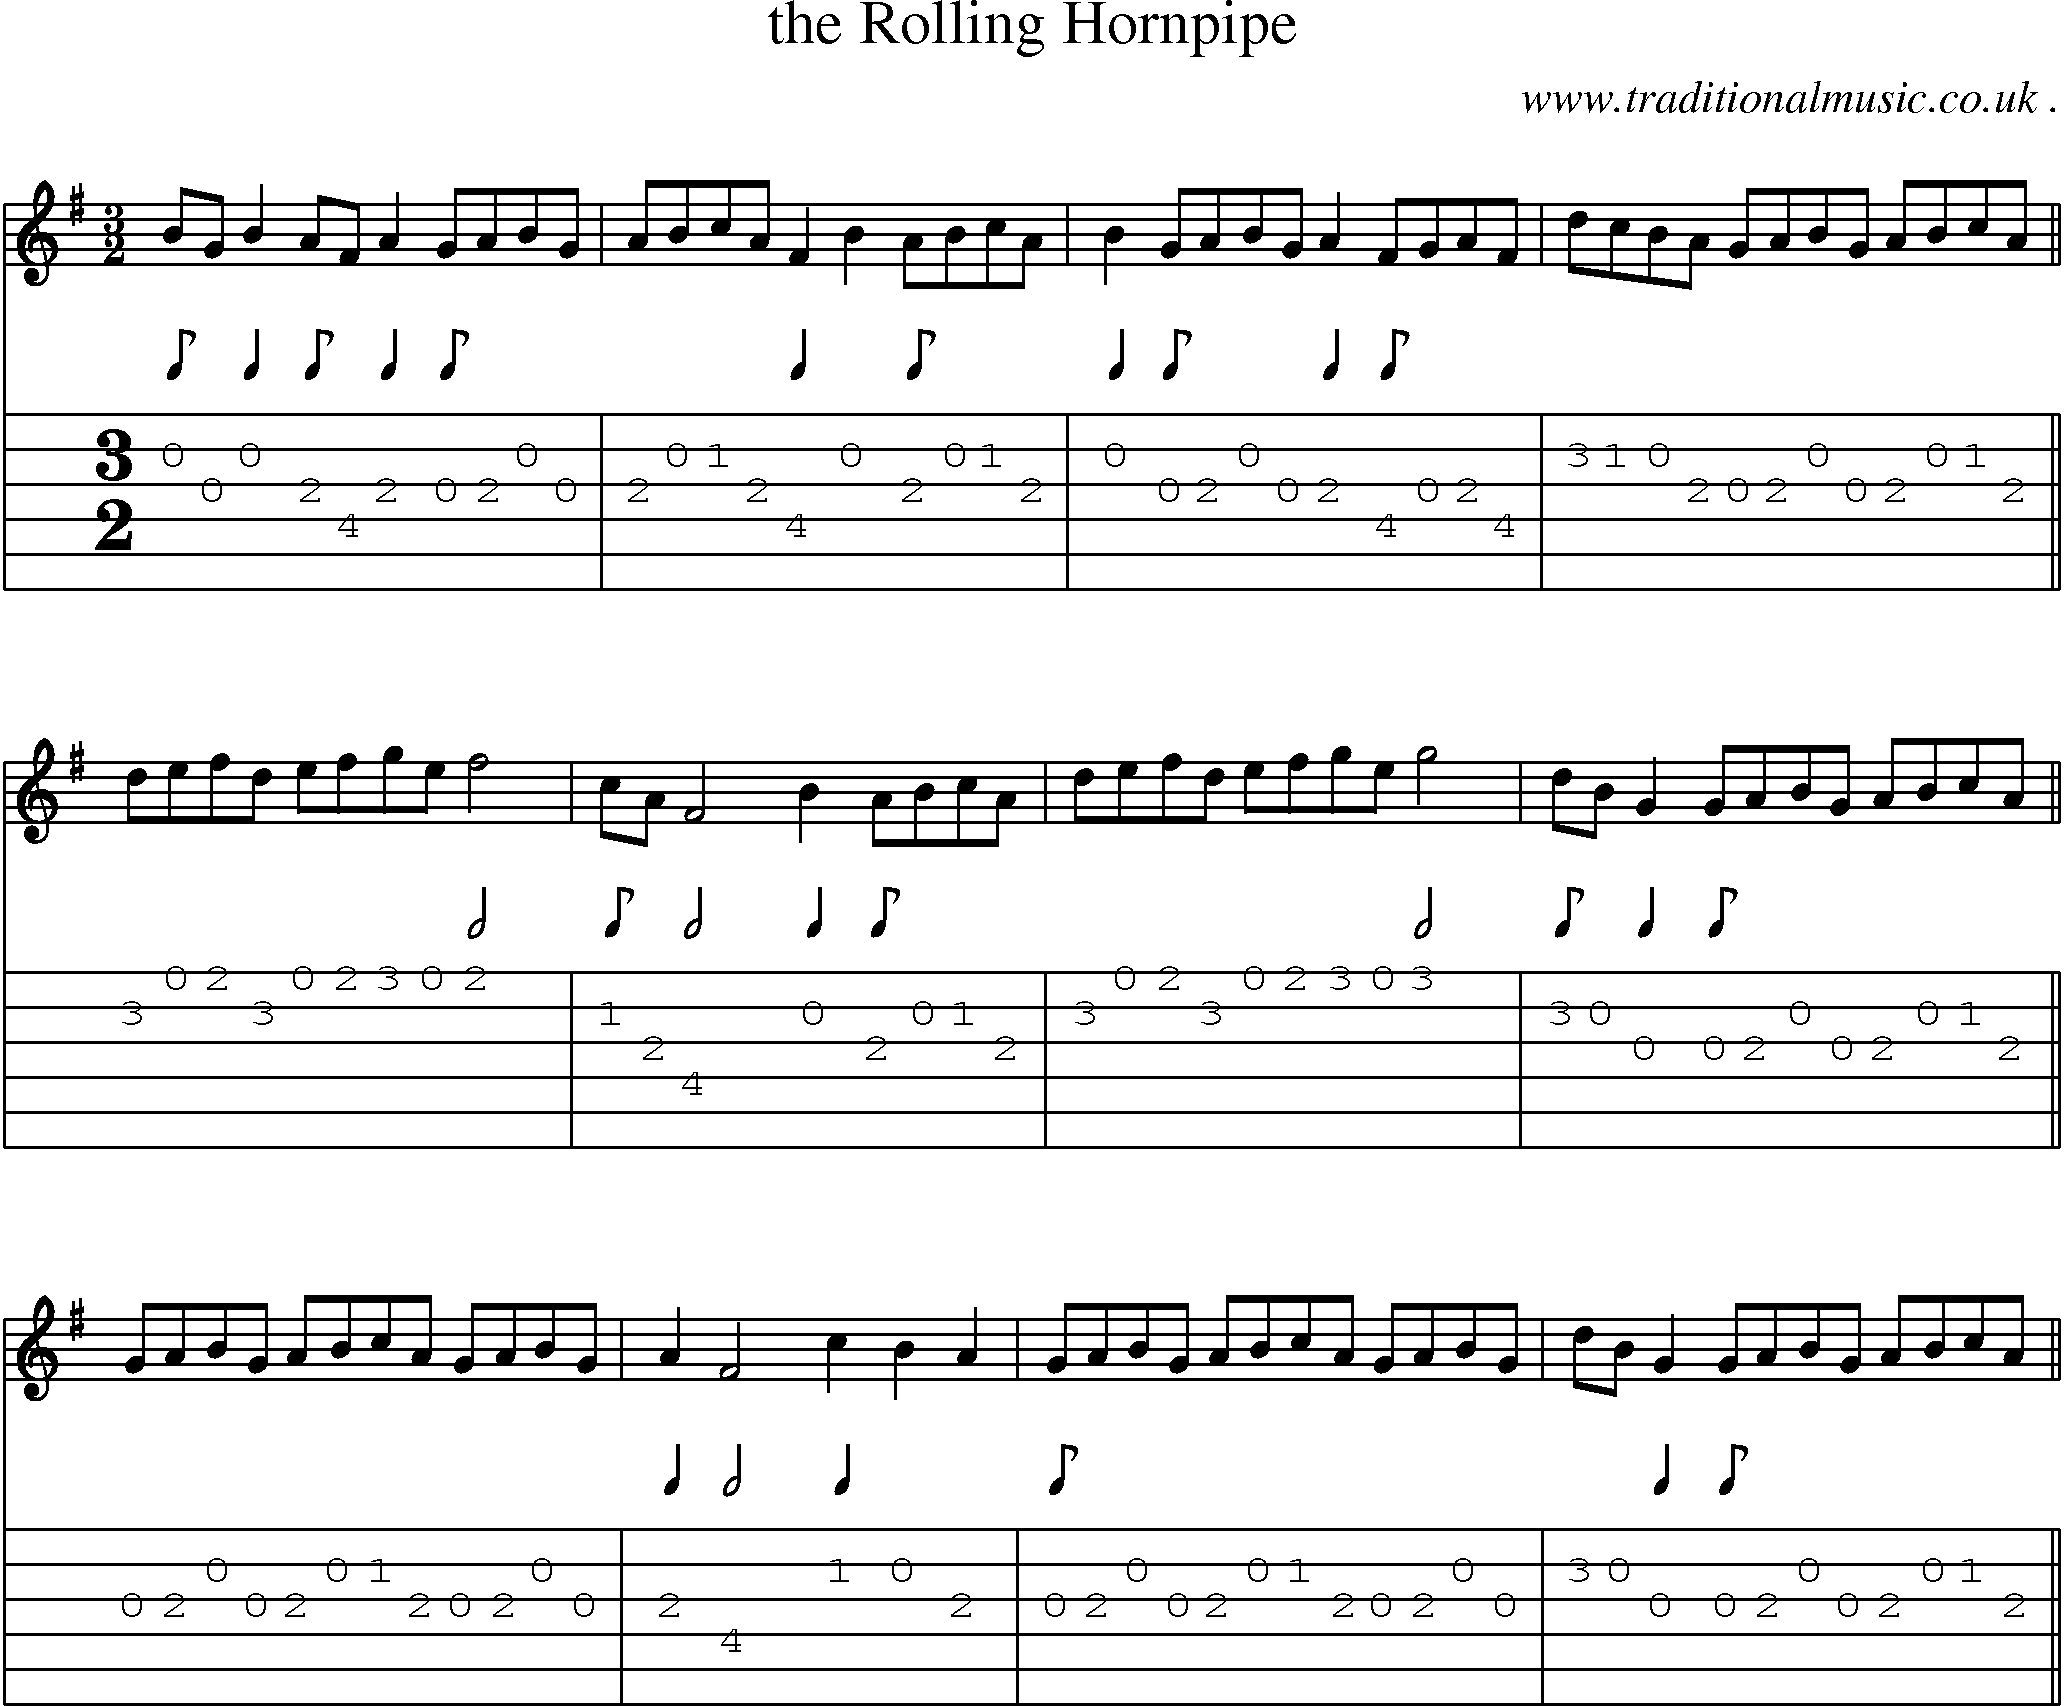 Sheet-Music and Guitar Tabs for The Rolling Hornpipe